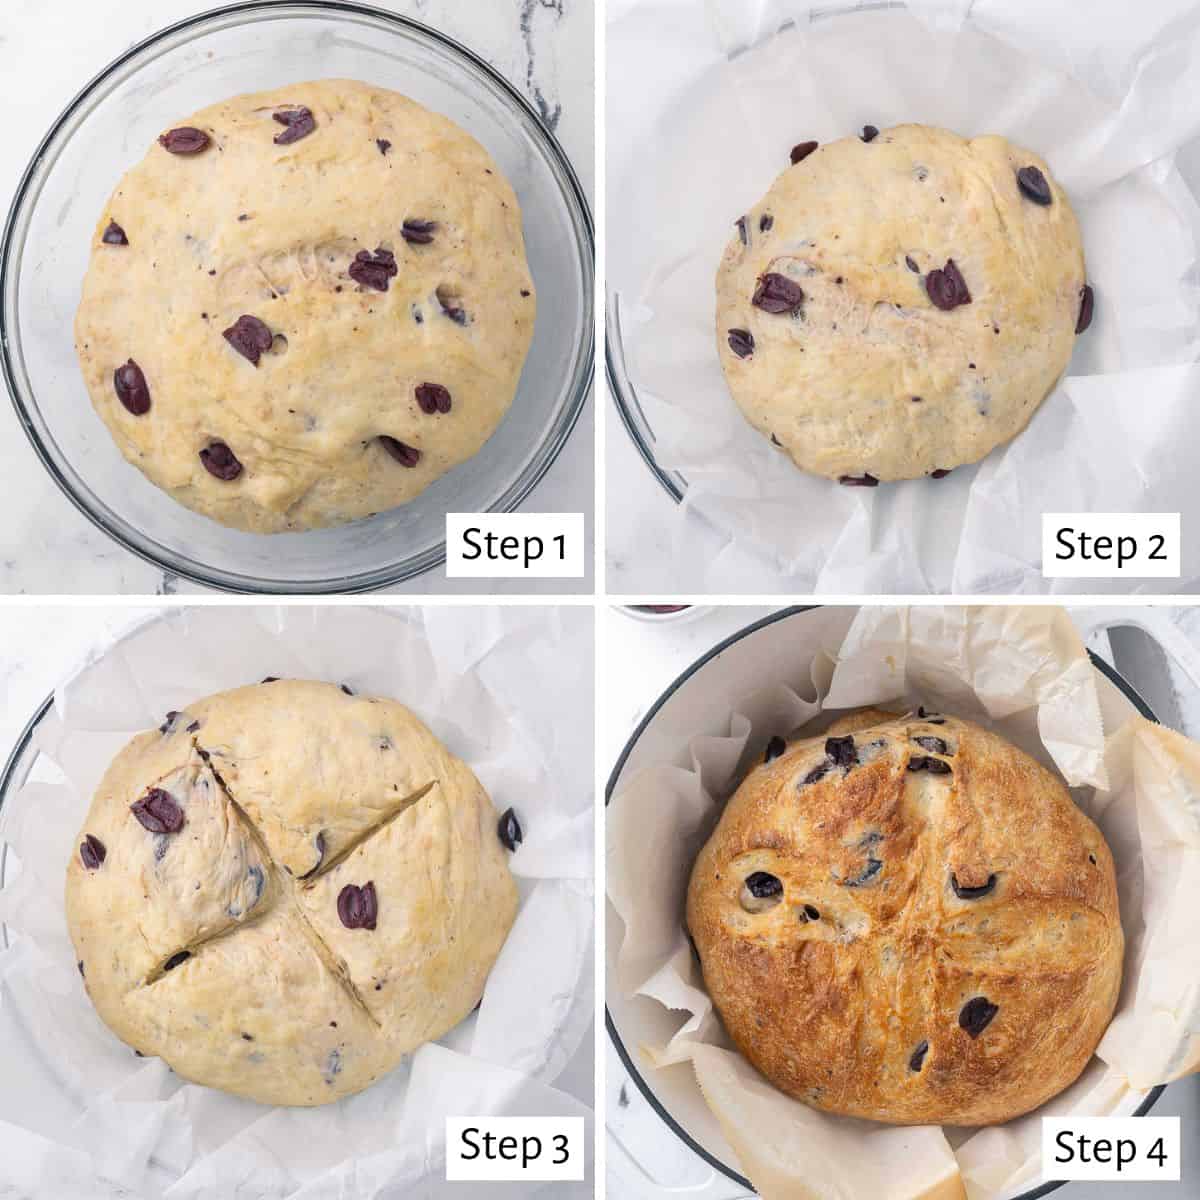 4-image collage of dough rising: 1 - After the dough has doubled in size; 2 - After the dough is shaped into a smooth ball and set on a parchment-lined bowl; 3 - After the second rise with a cross-hatch cut into the top; 4 - After baking.